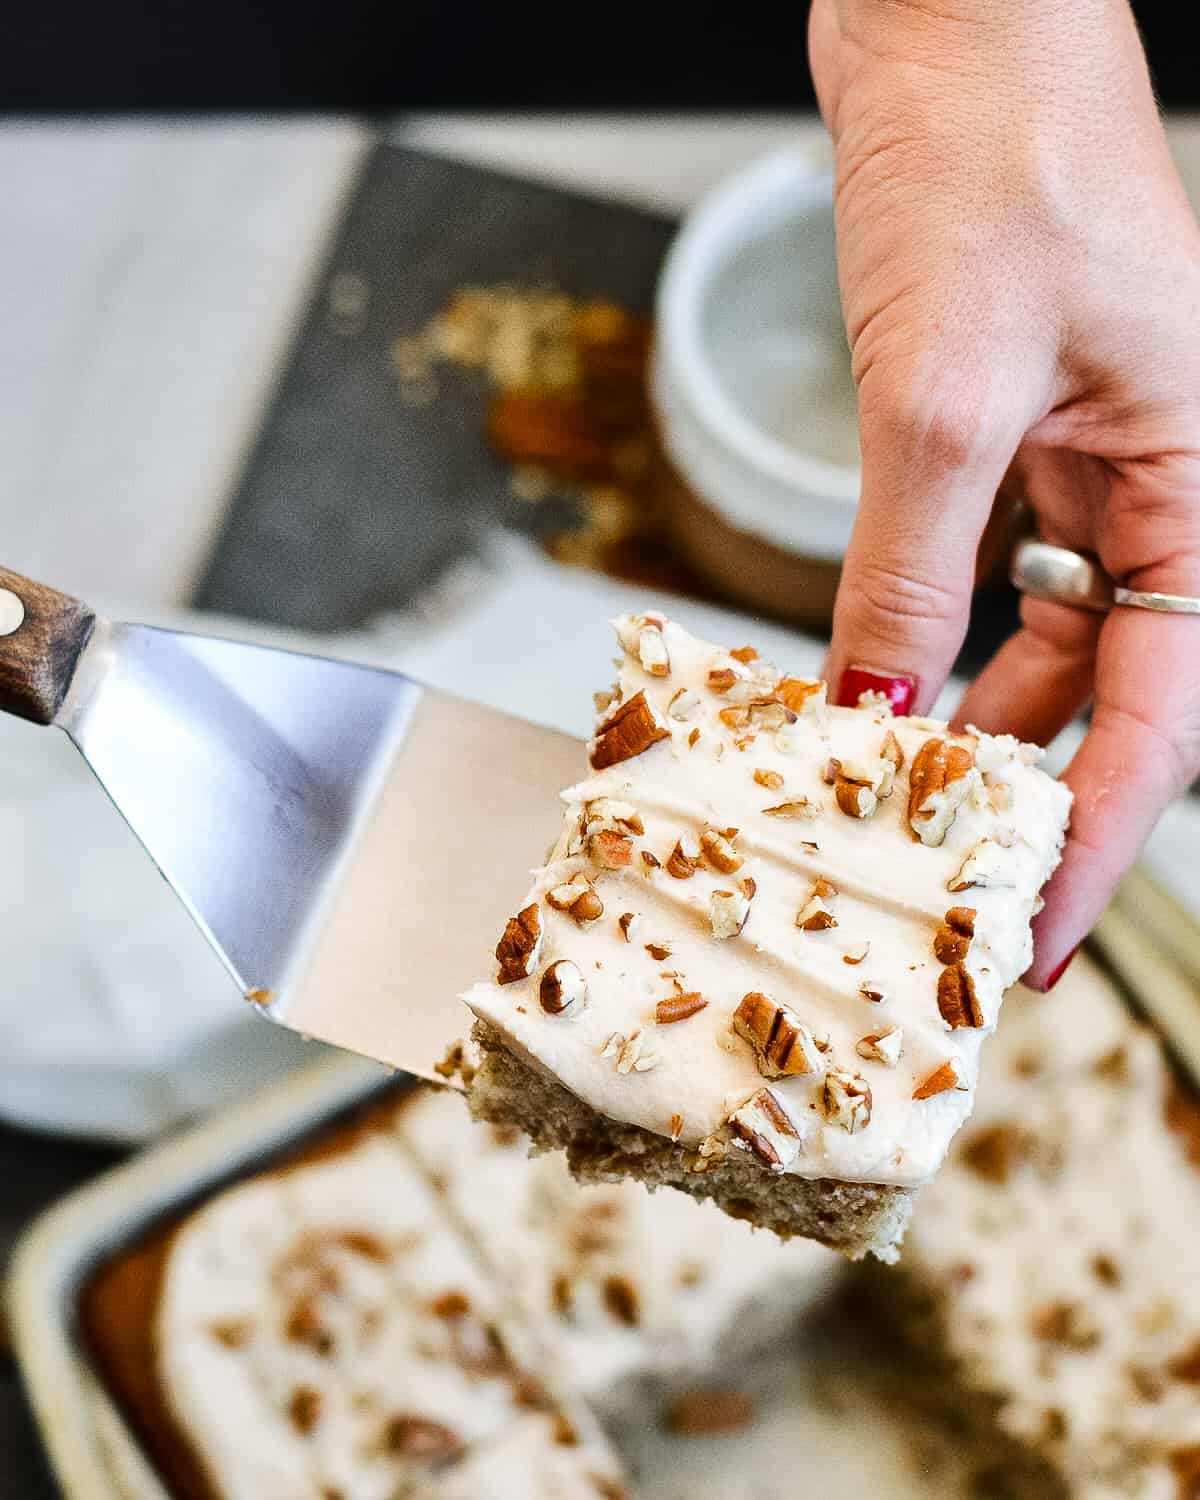 Hand serving a slice of pecan cake with the rest of the cake in the background.